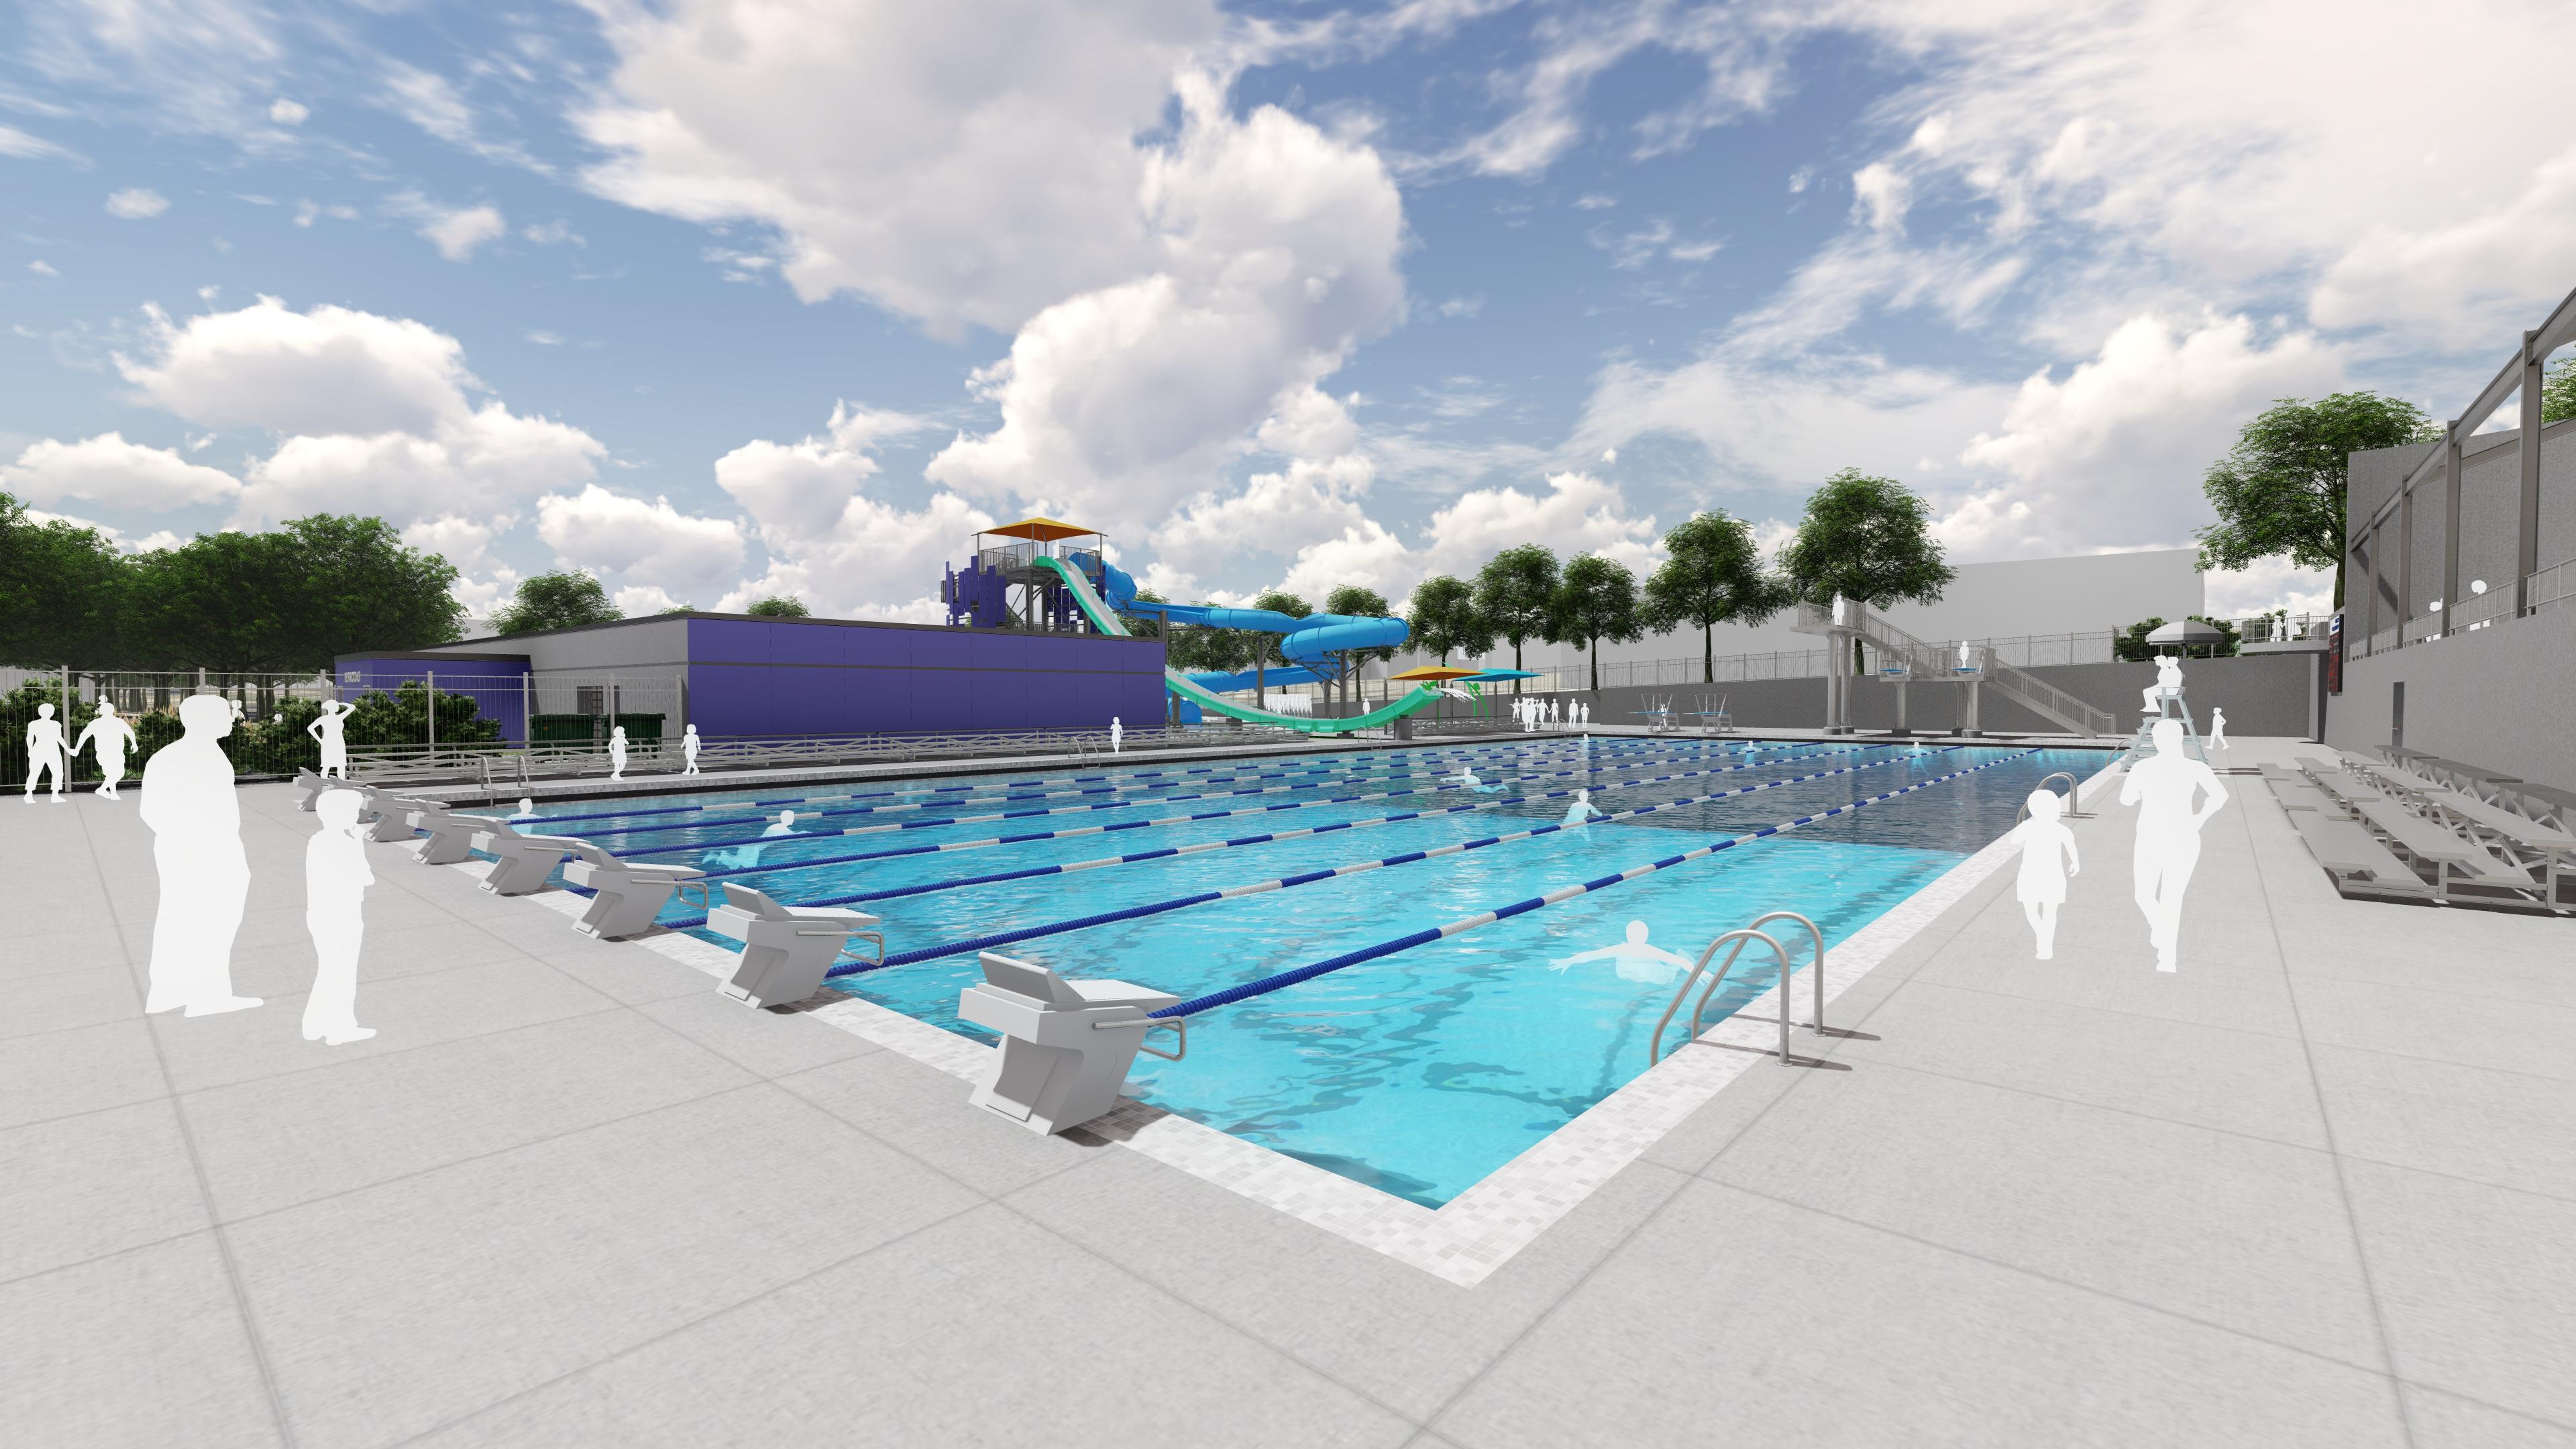 This image shows the renderings for the Island Park Pool with a focus on the Competitive Pool